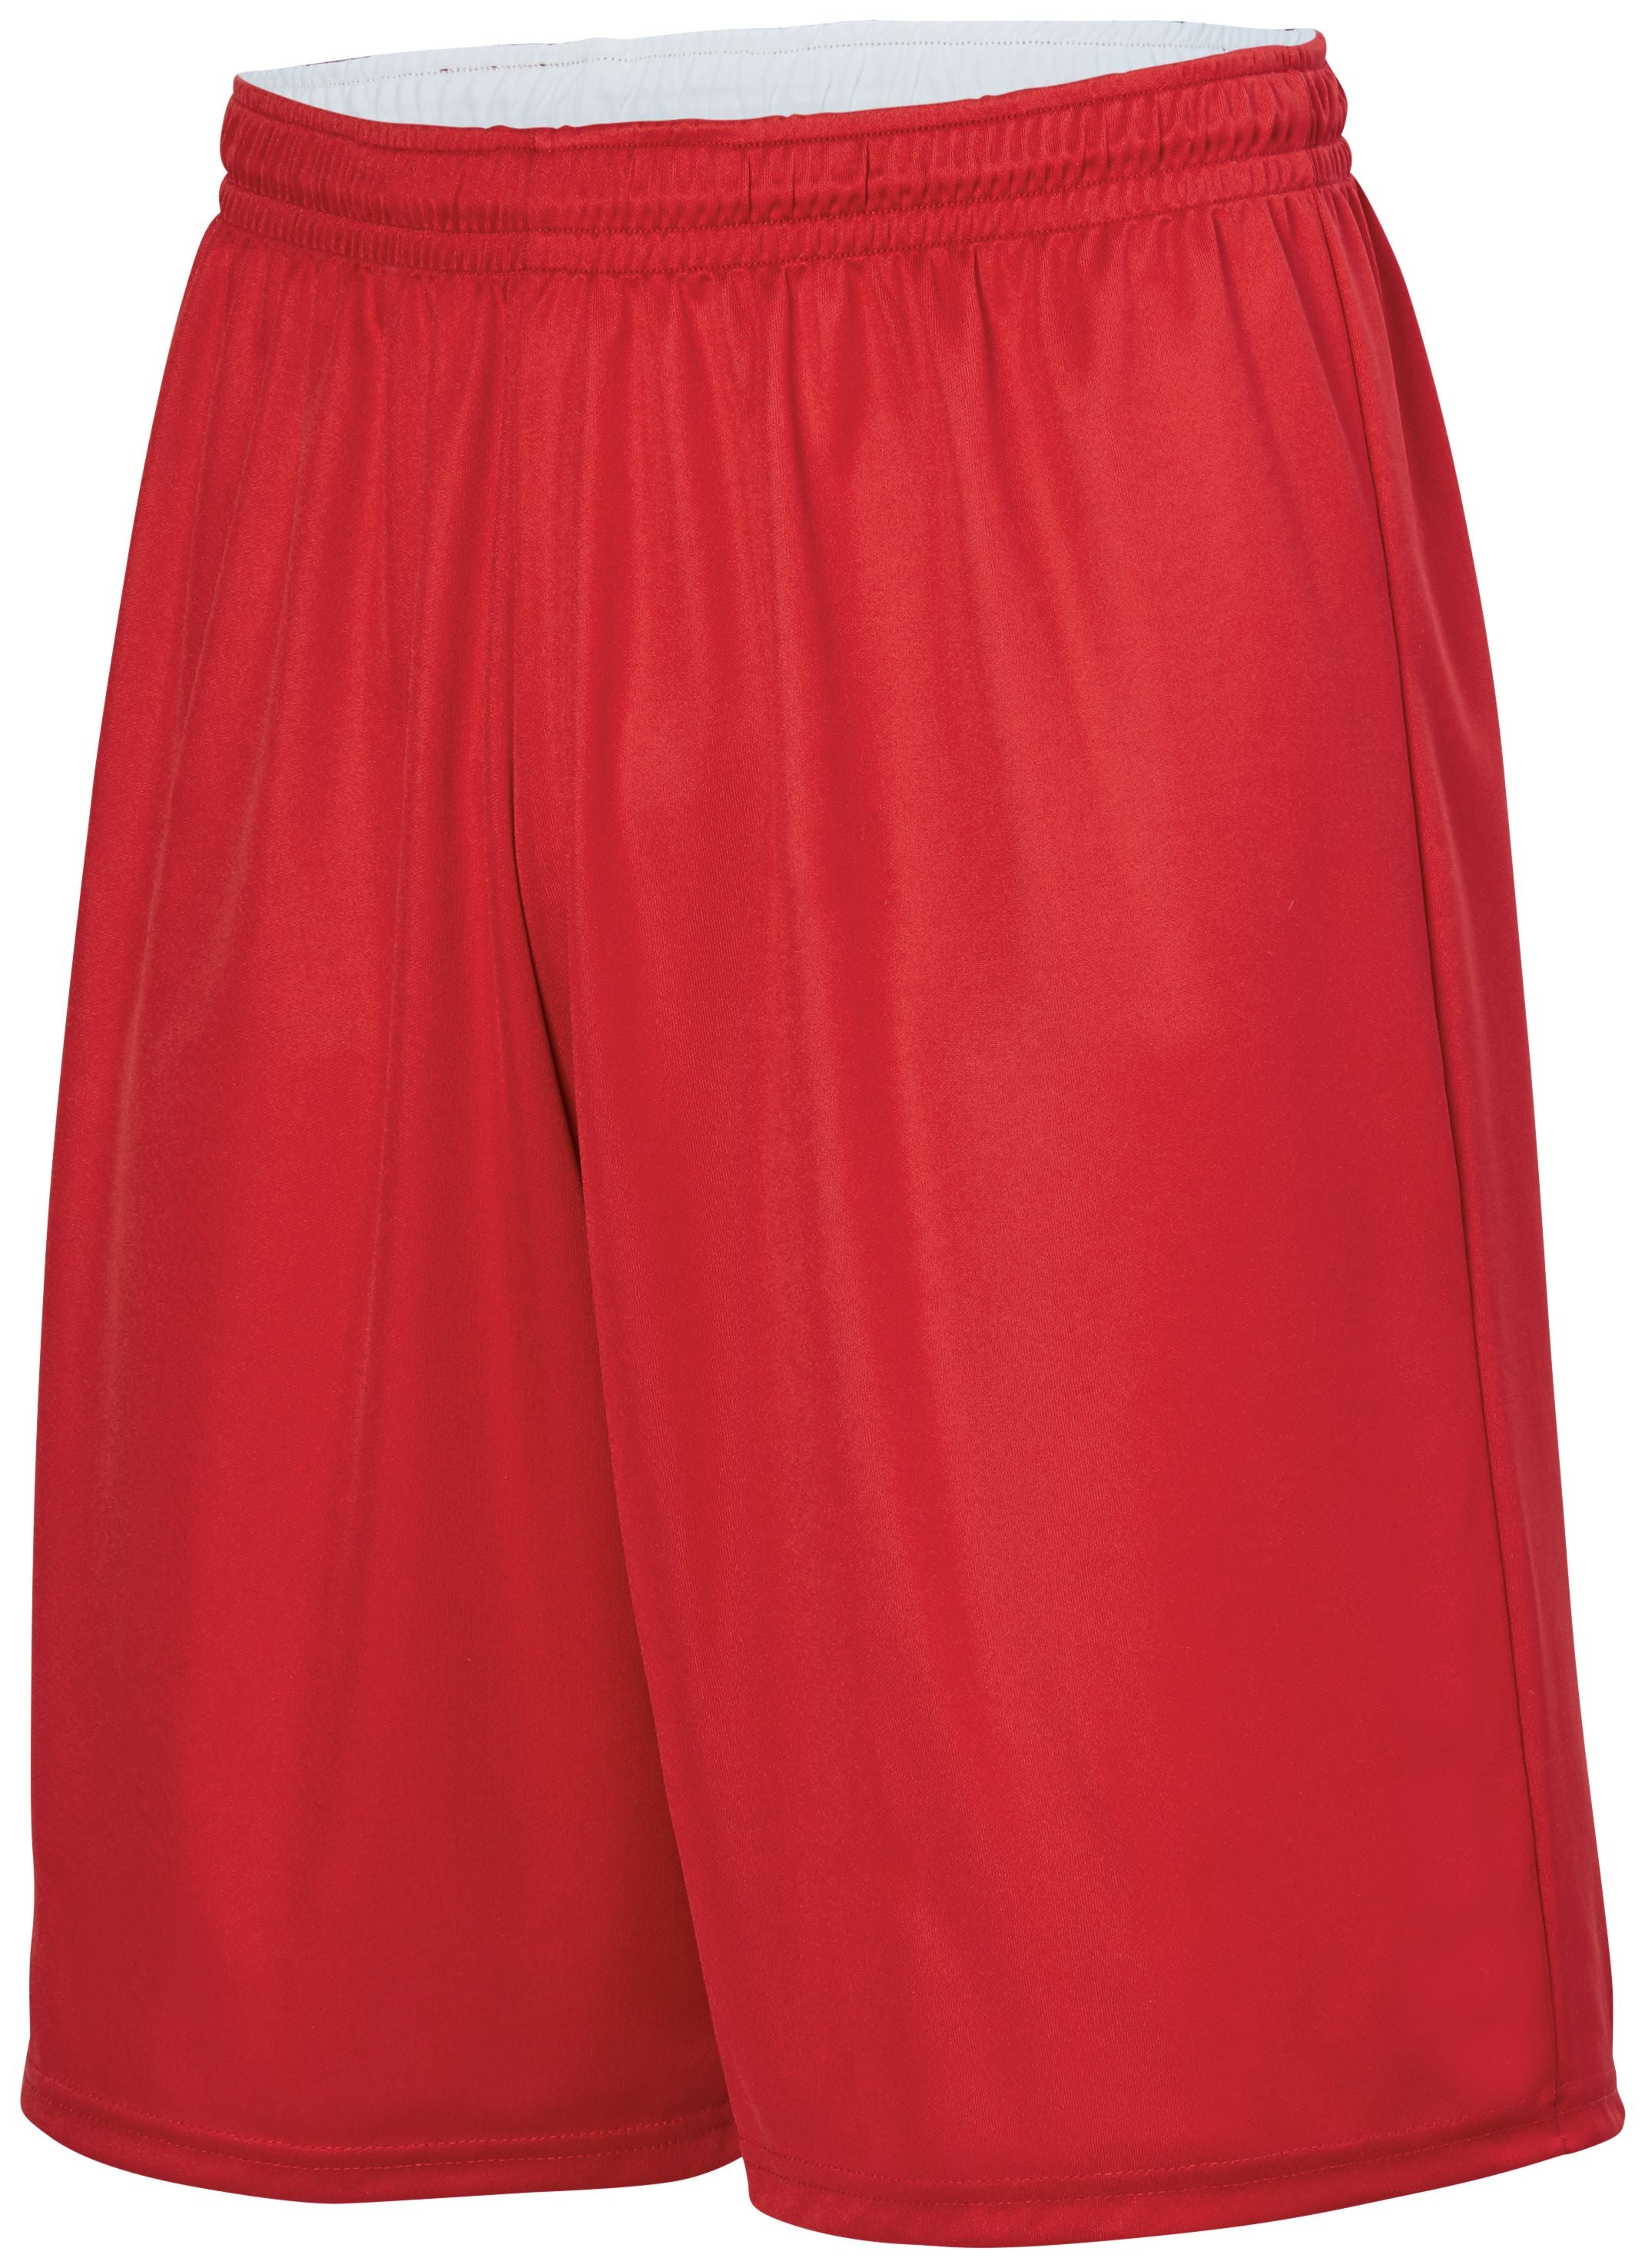 Augusta Sportswear Youth Reversible Wicking Shorts in Red/White  -Part of the Youth, Youth-Shorts, Augusta-Products, Basketball, All-Sports, All-Sports-1 product lines at KanaleyCreations.com